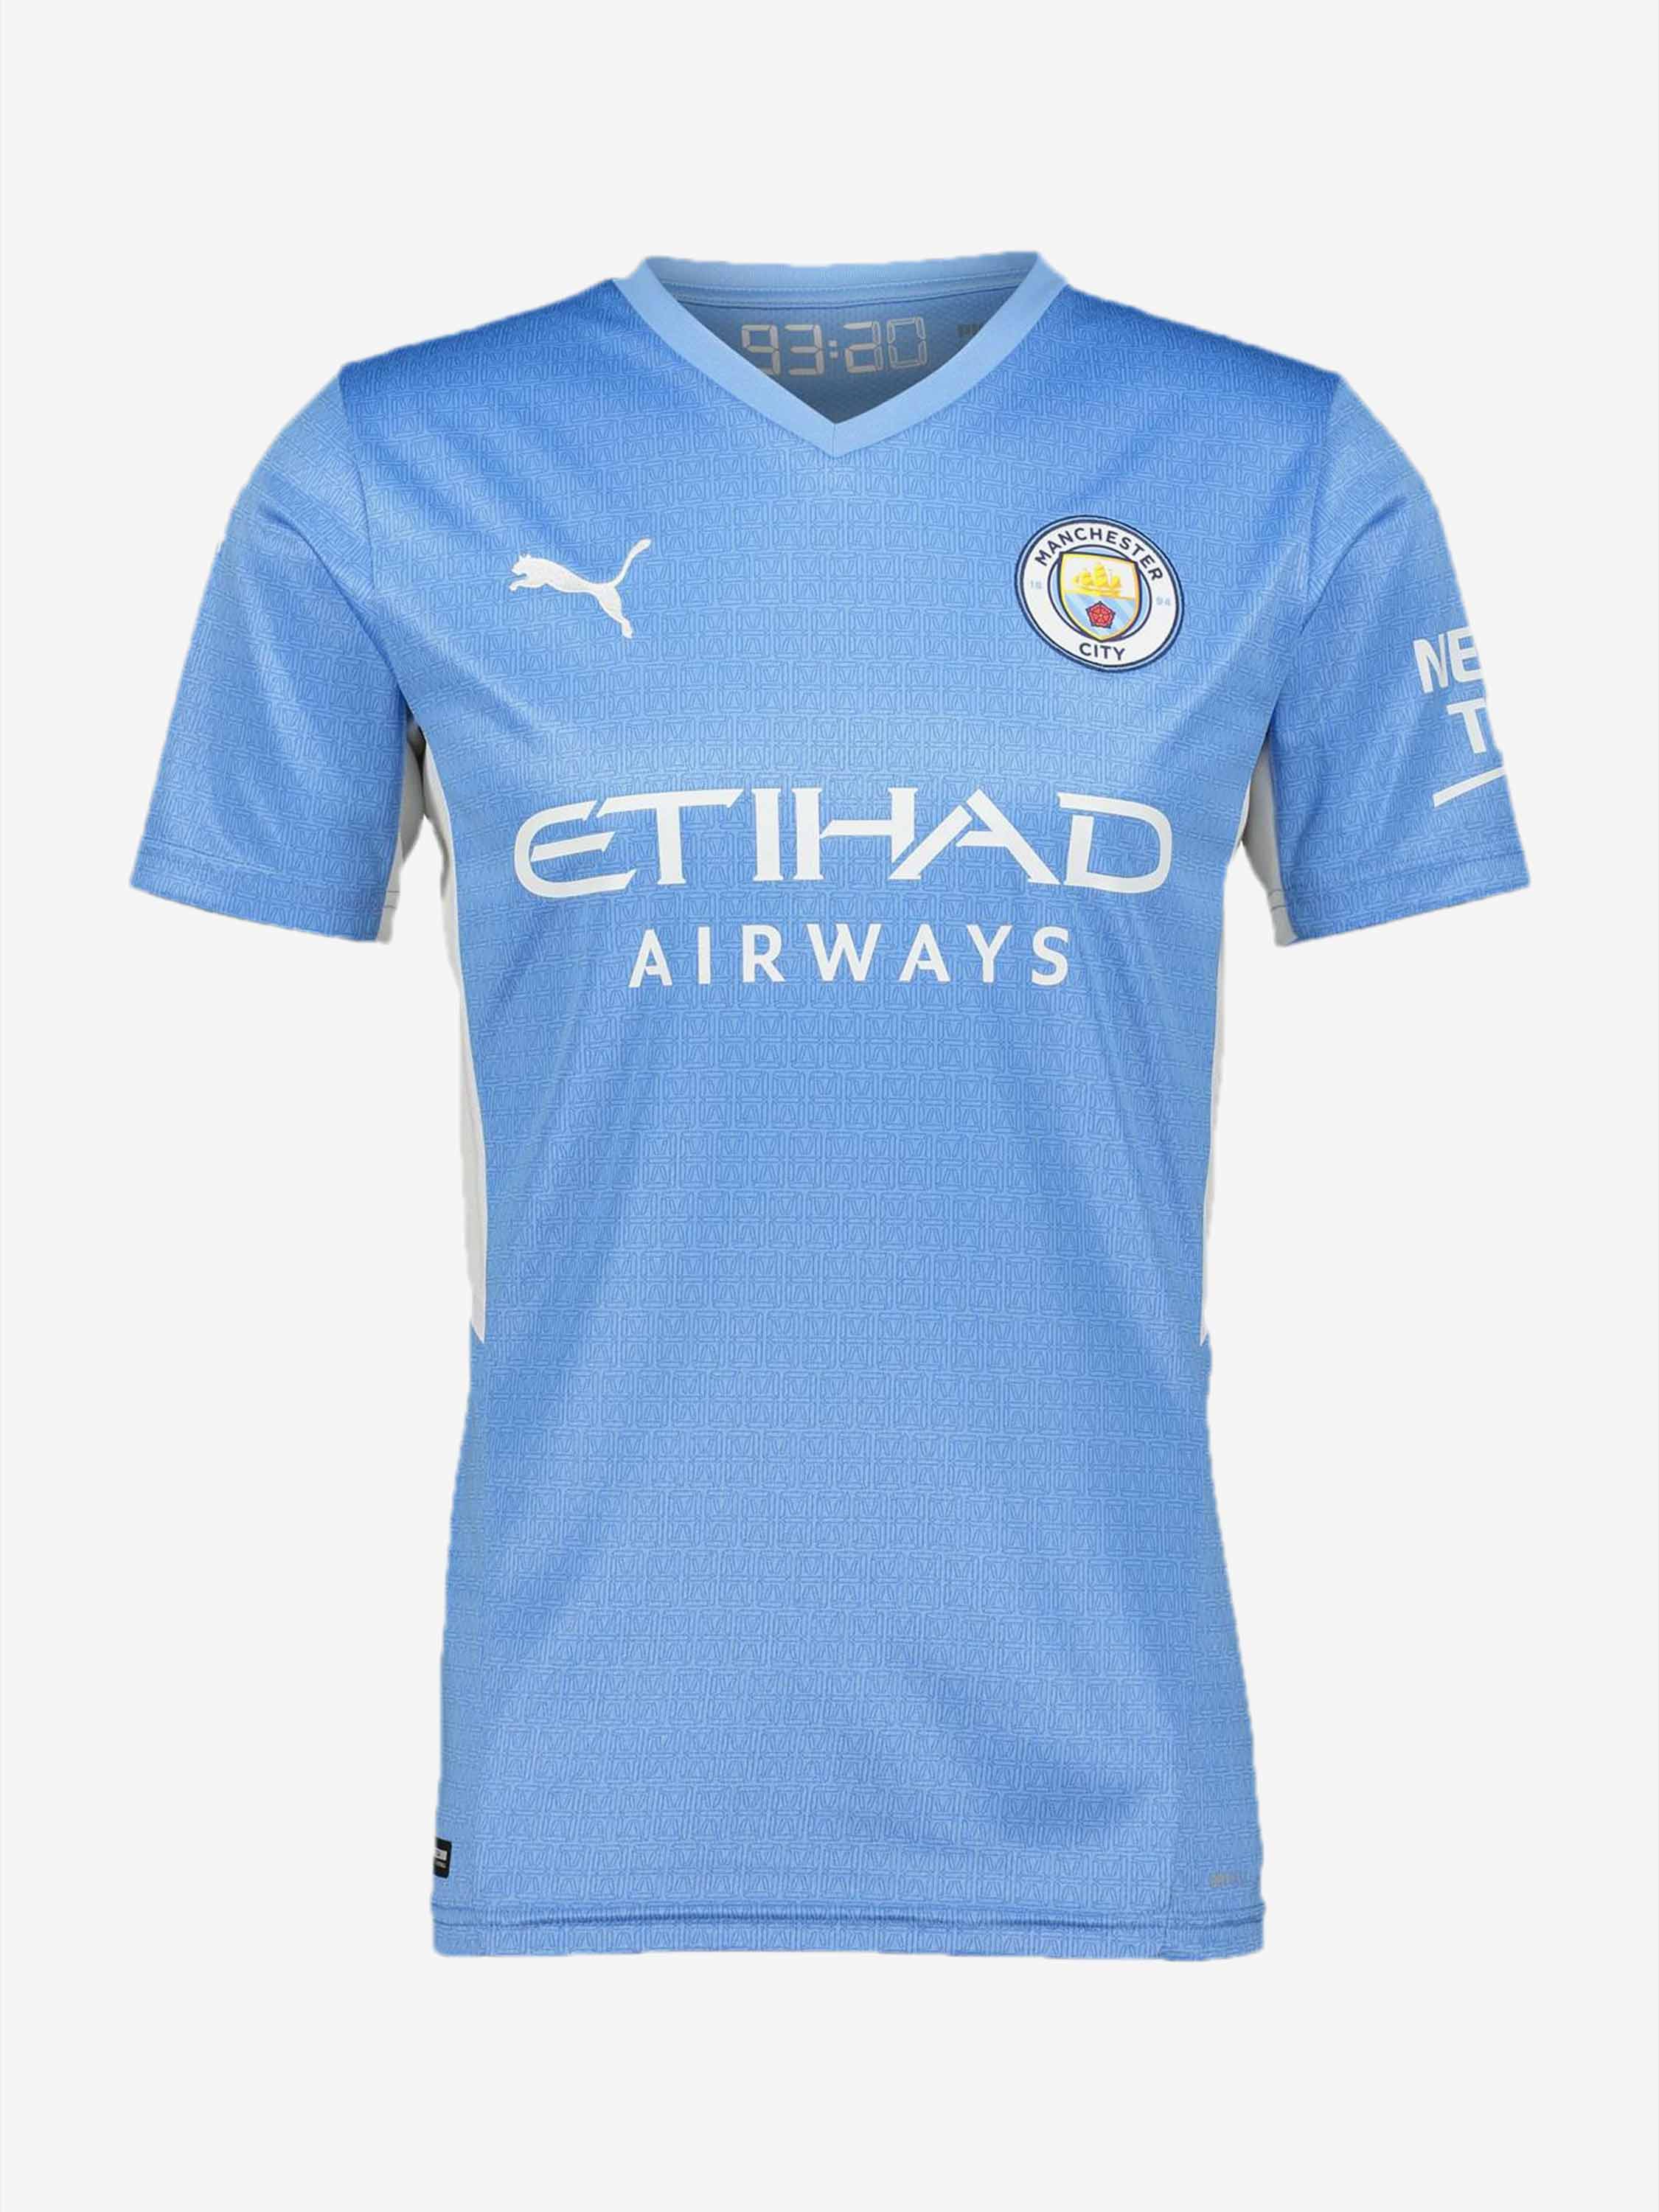 Manchester City Home Jersey 21 22 Season Buy Online In India.